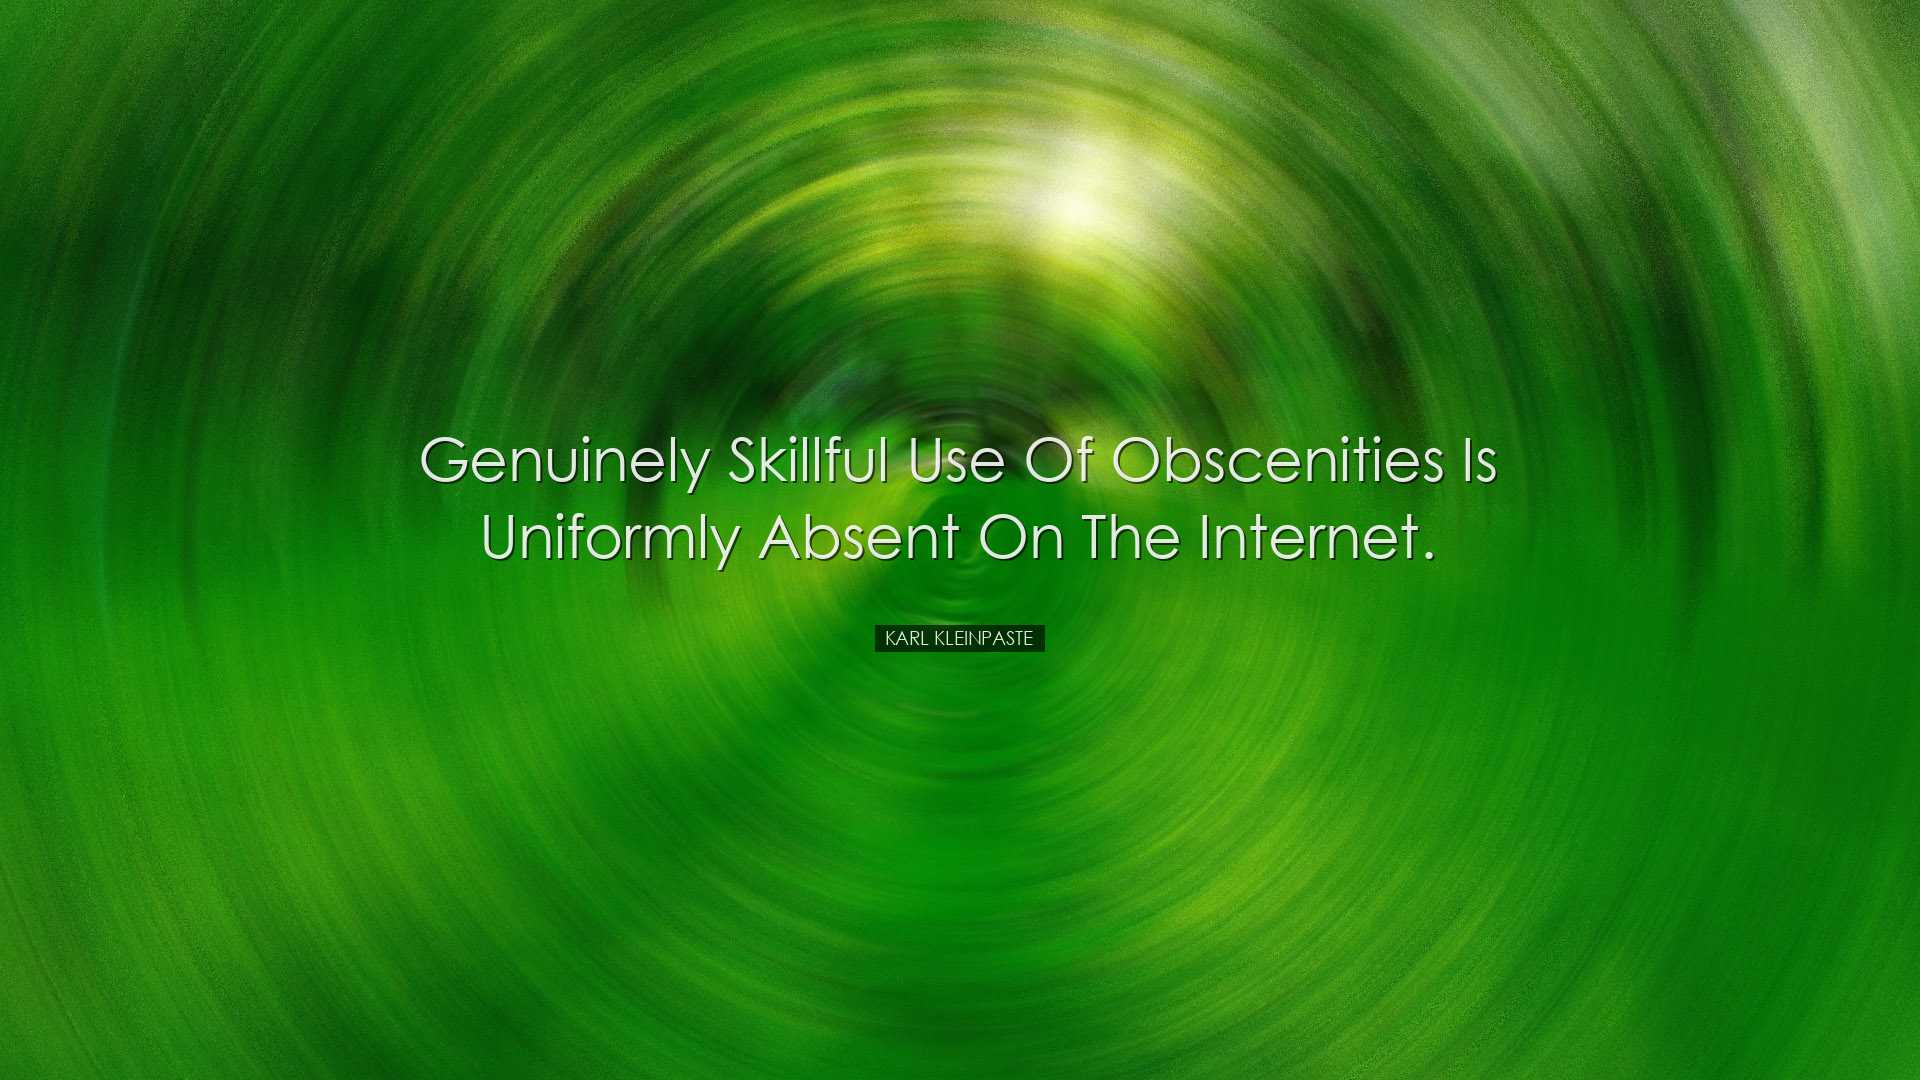 Genuinely skillful use of obscenities is uniformly absent on the I